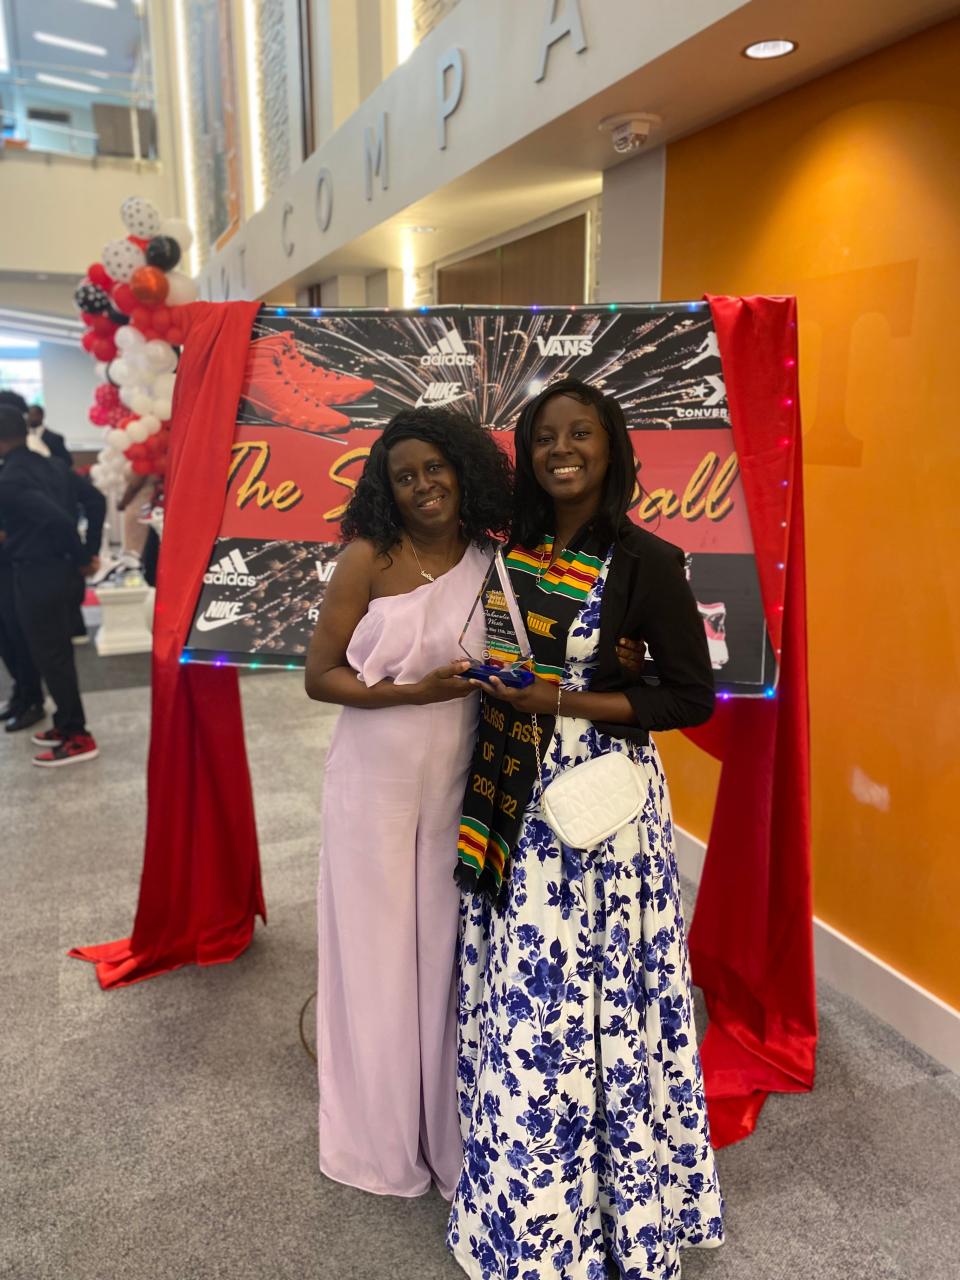 Haslam Scholar Jahneulie Weste receives the Achiever of the Year award in Knox County Schools National Achievers Society, accompanied by her proud mom, Jacqueline. May 2022